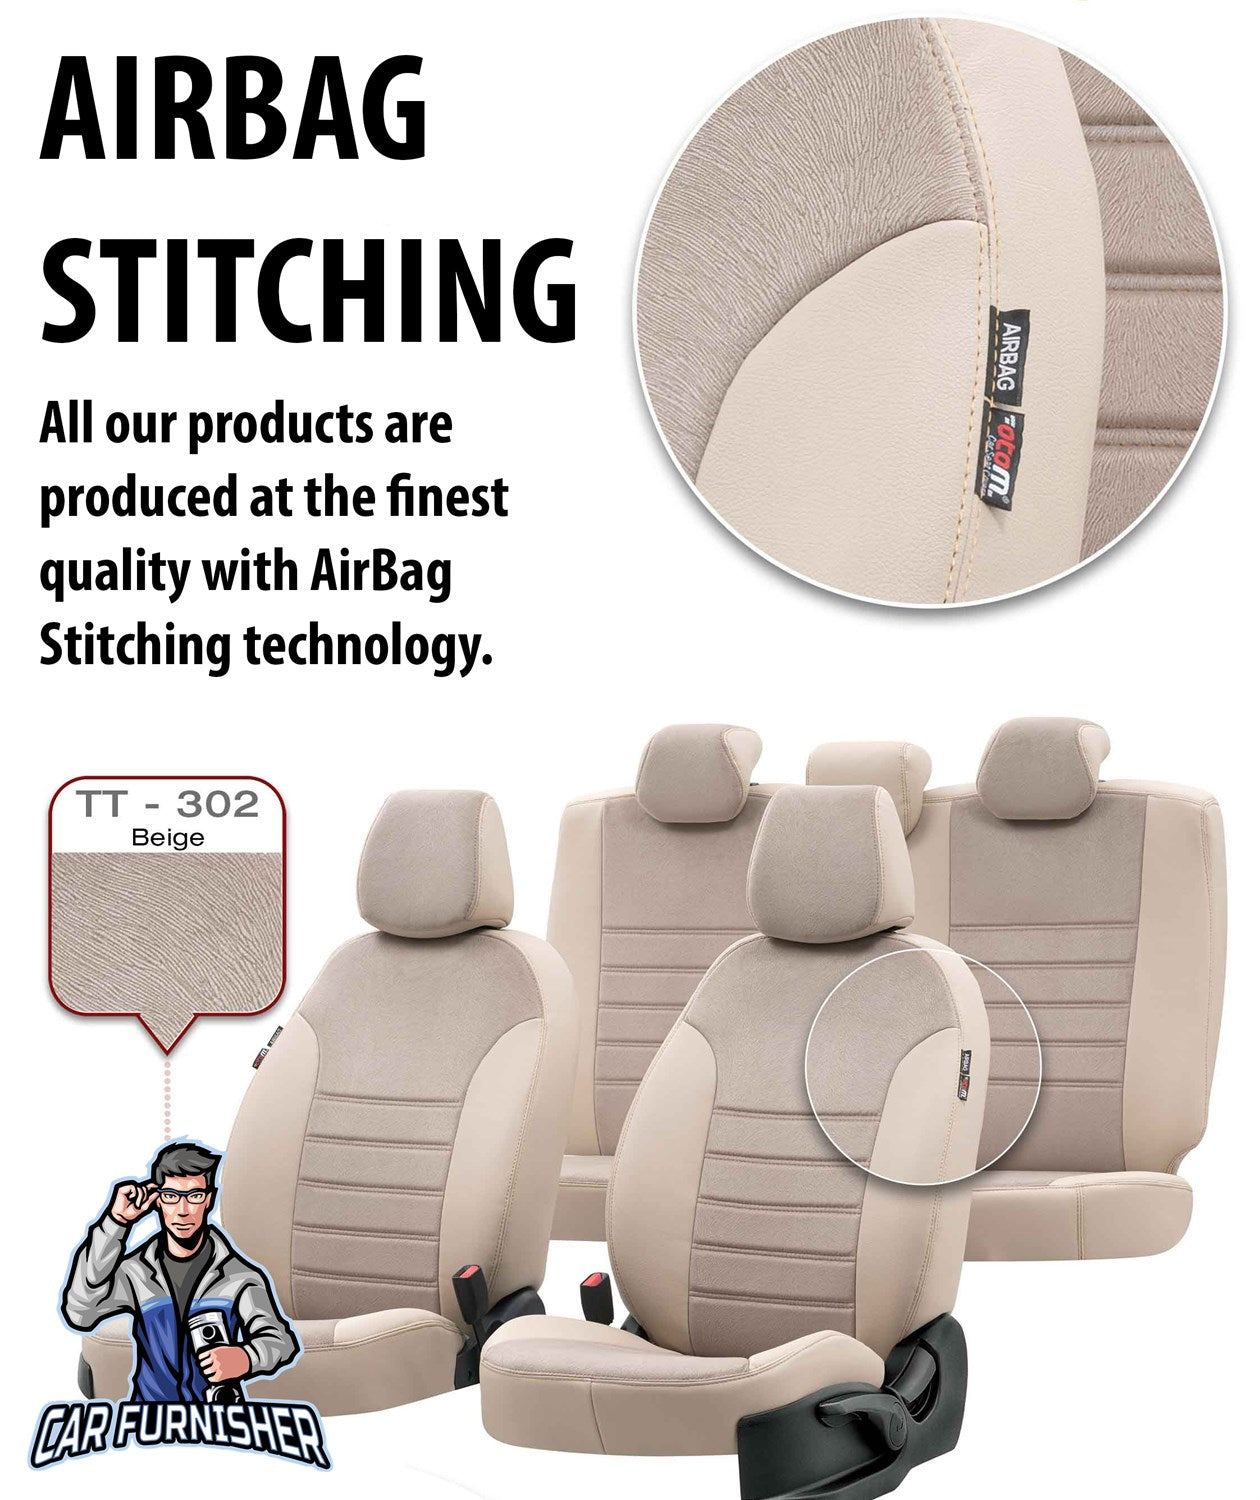 Seat Alhambra Seat Covers London Foal Feather Design Black Leather & Foal Feather